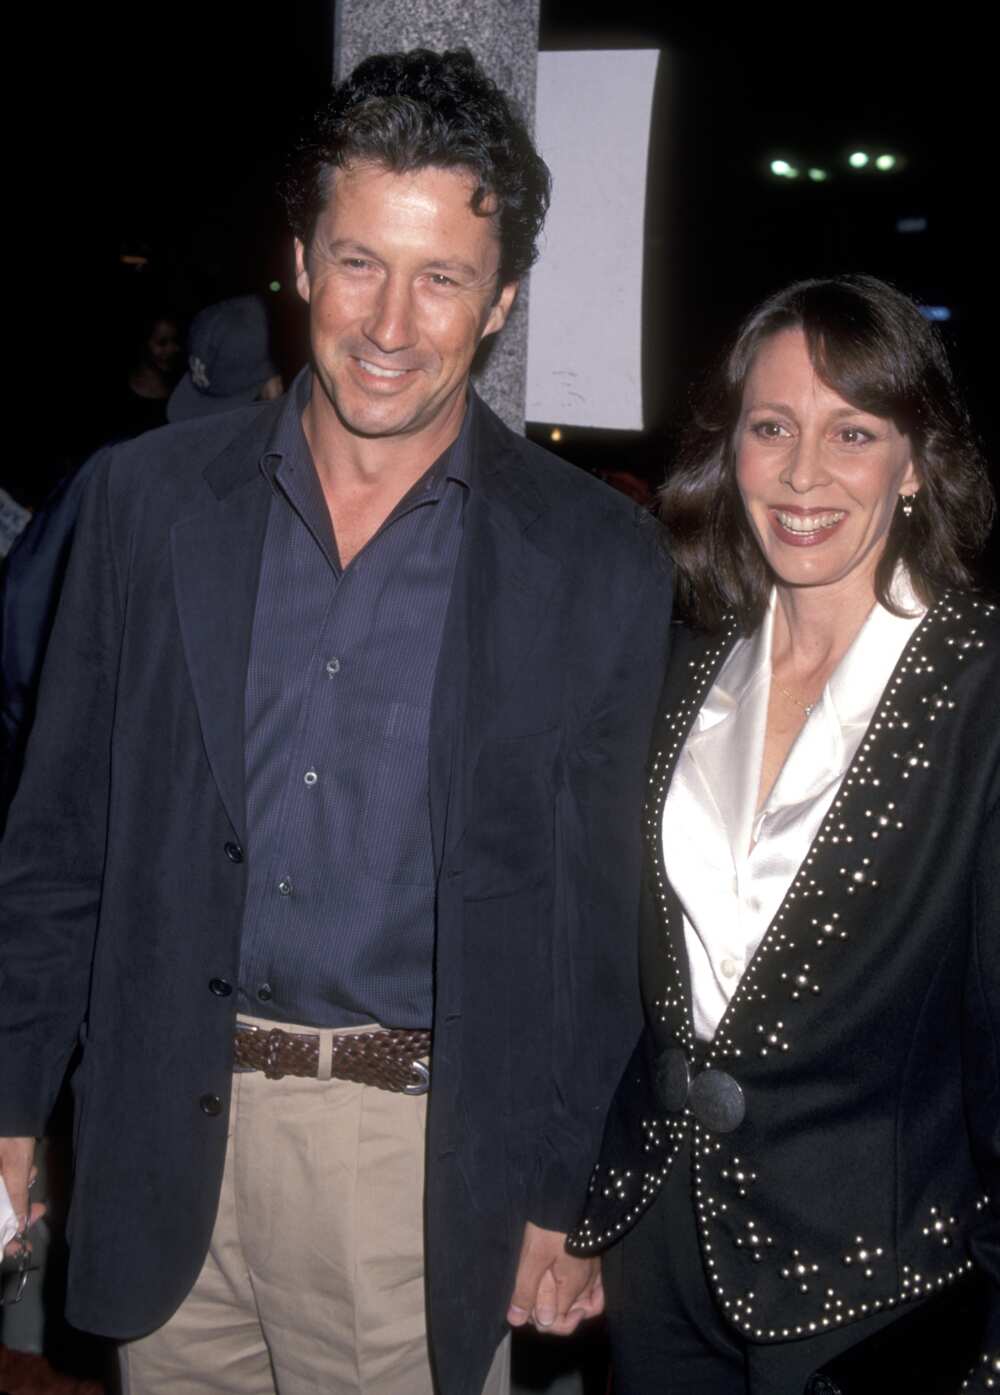 Charles Shaughnessy et sa femme Susan
Photo : Ron Galella, Ltd./Ron Galella Collection via Getty Images